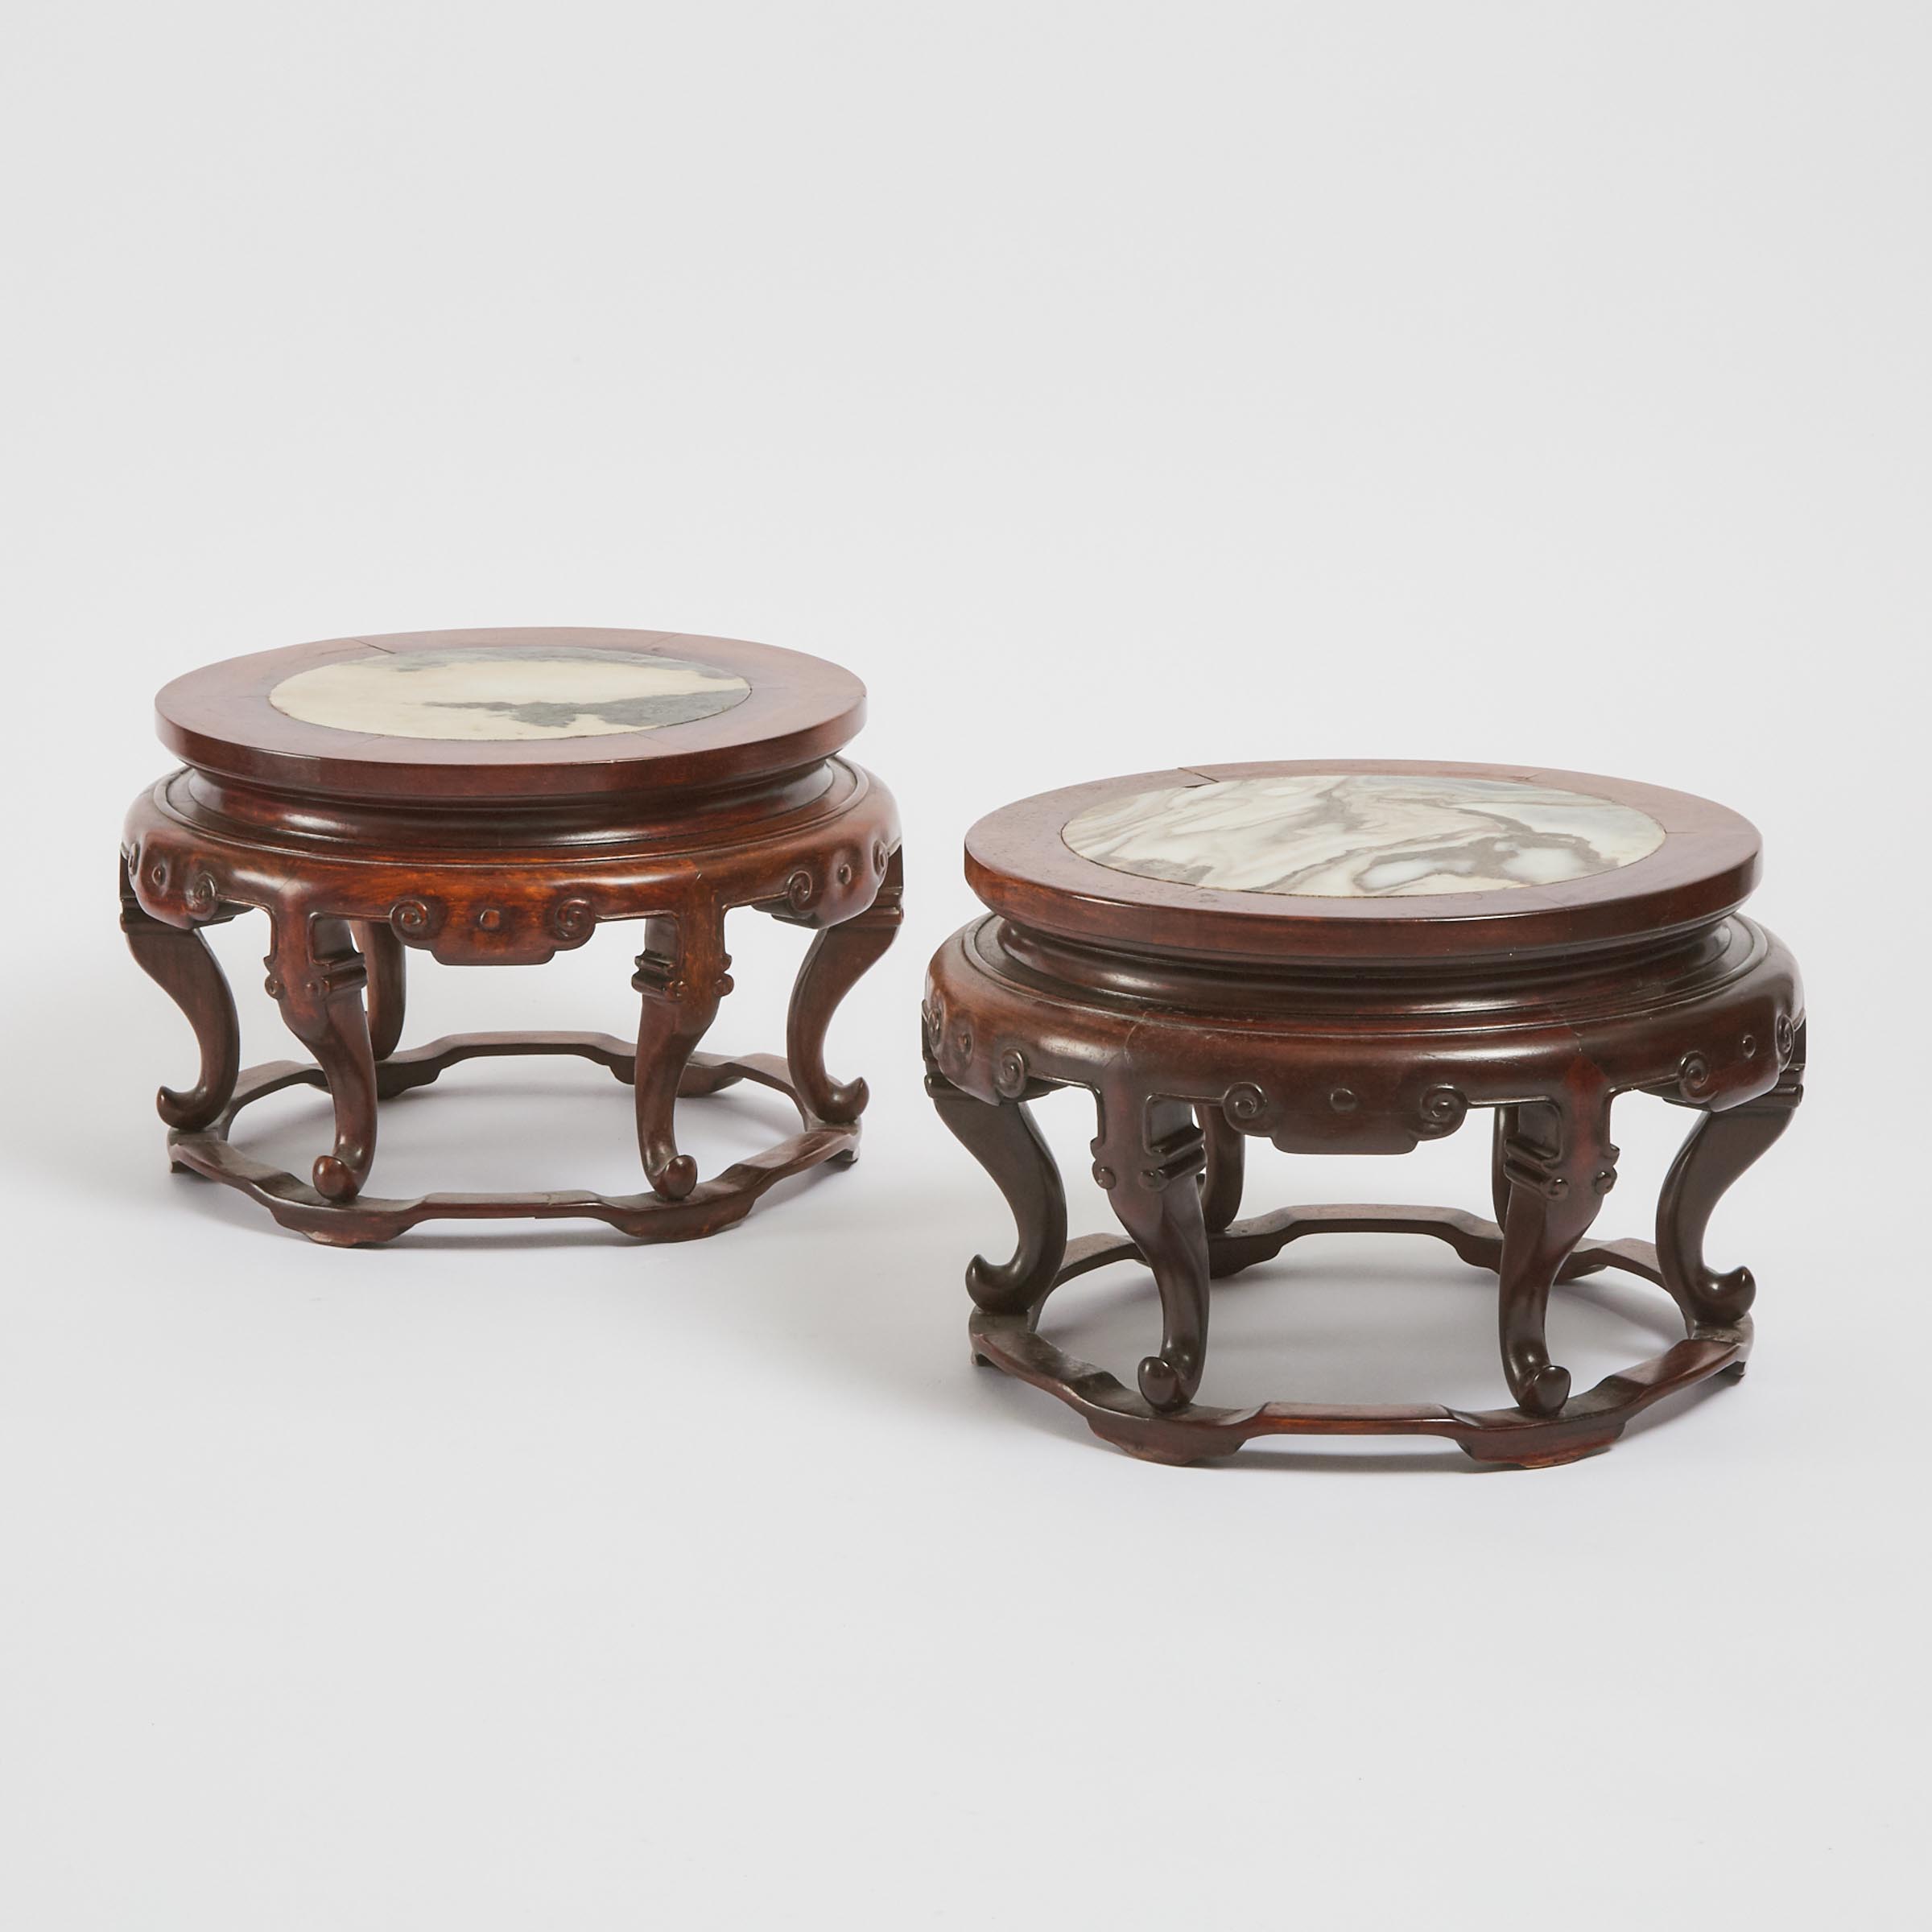 Two Chinese Marble Inset Hardwood Stands